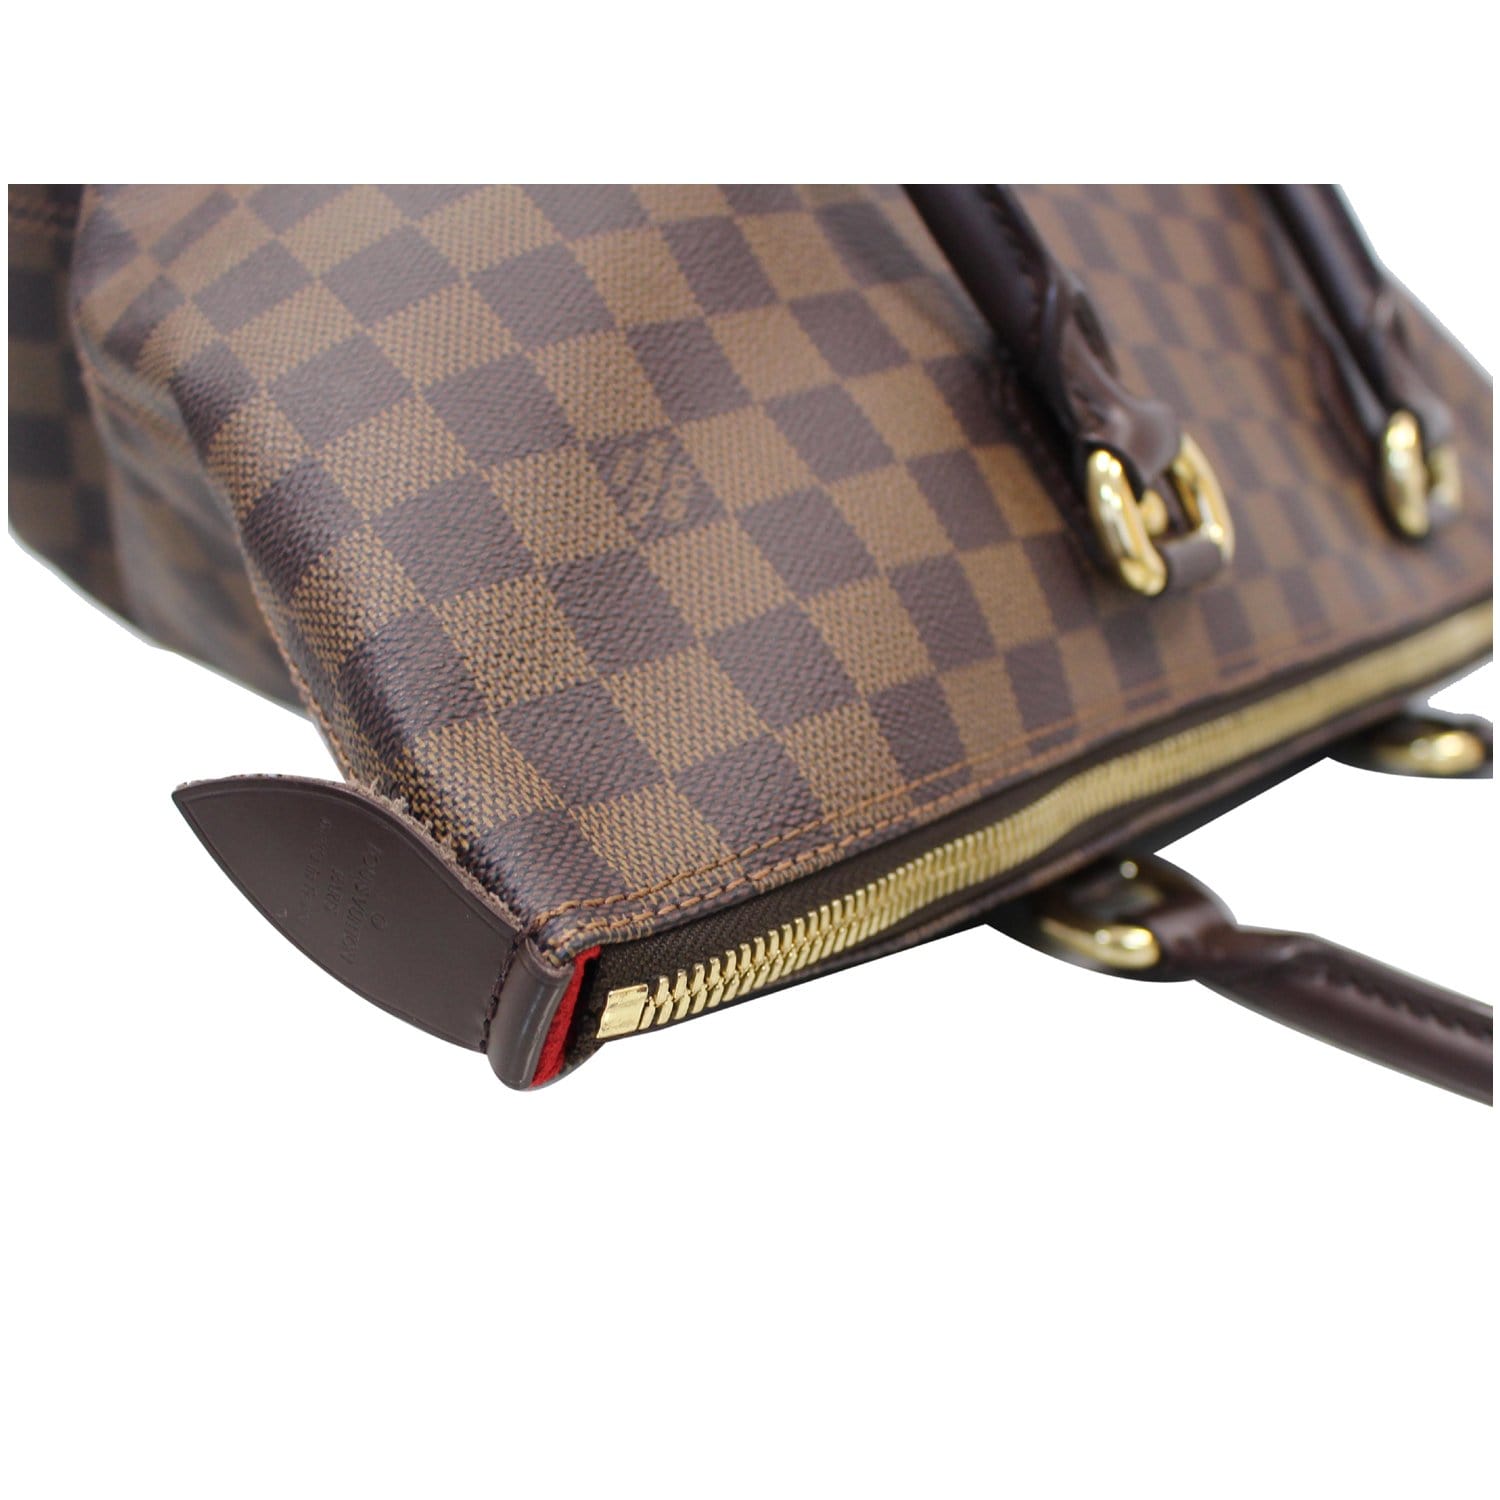 Whay if you want a bag with a zipper? The Louis Vuitton Saleya MM is a